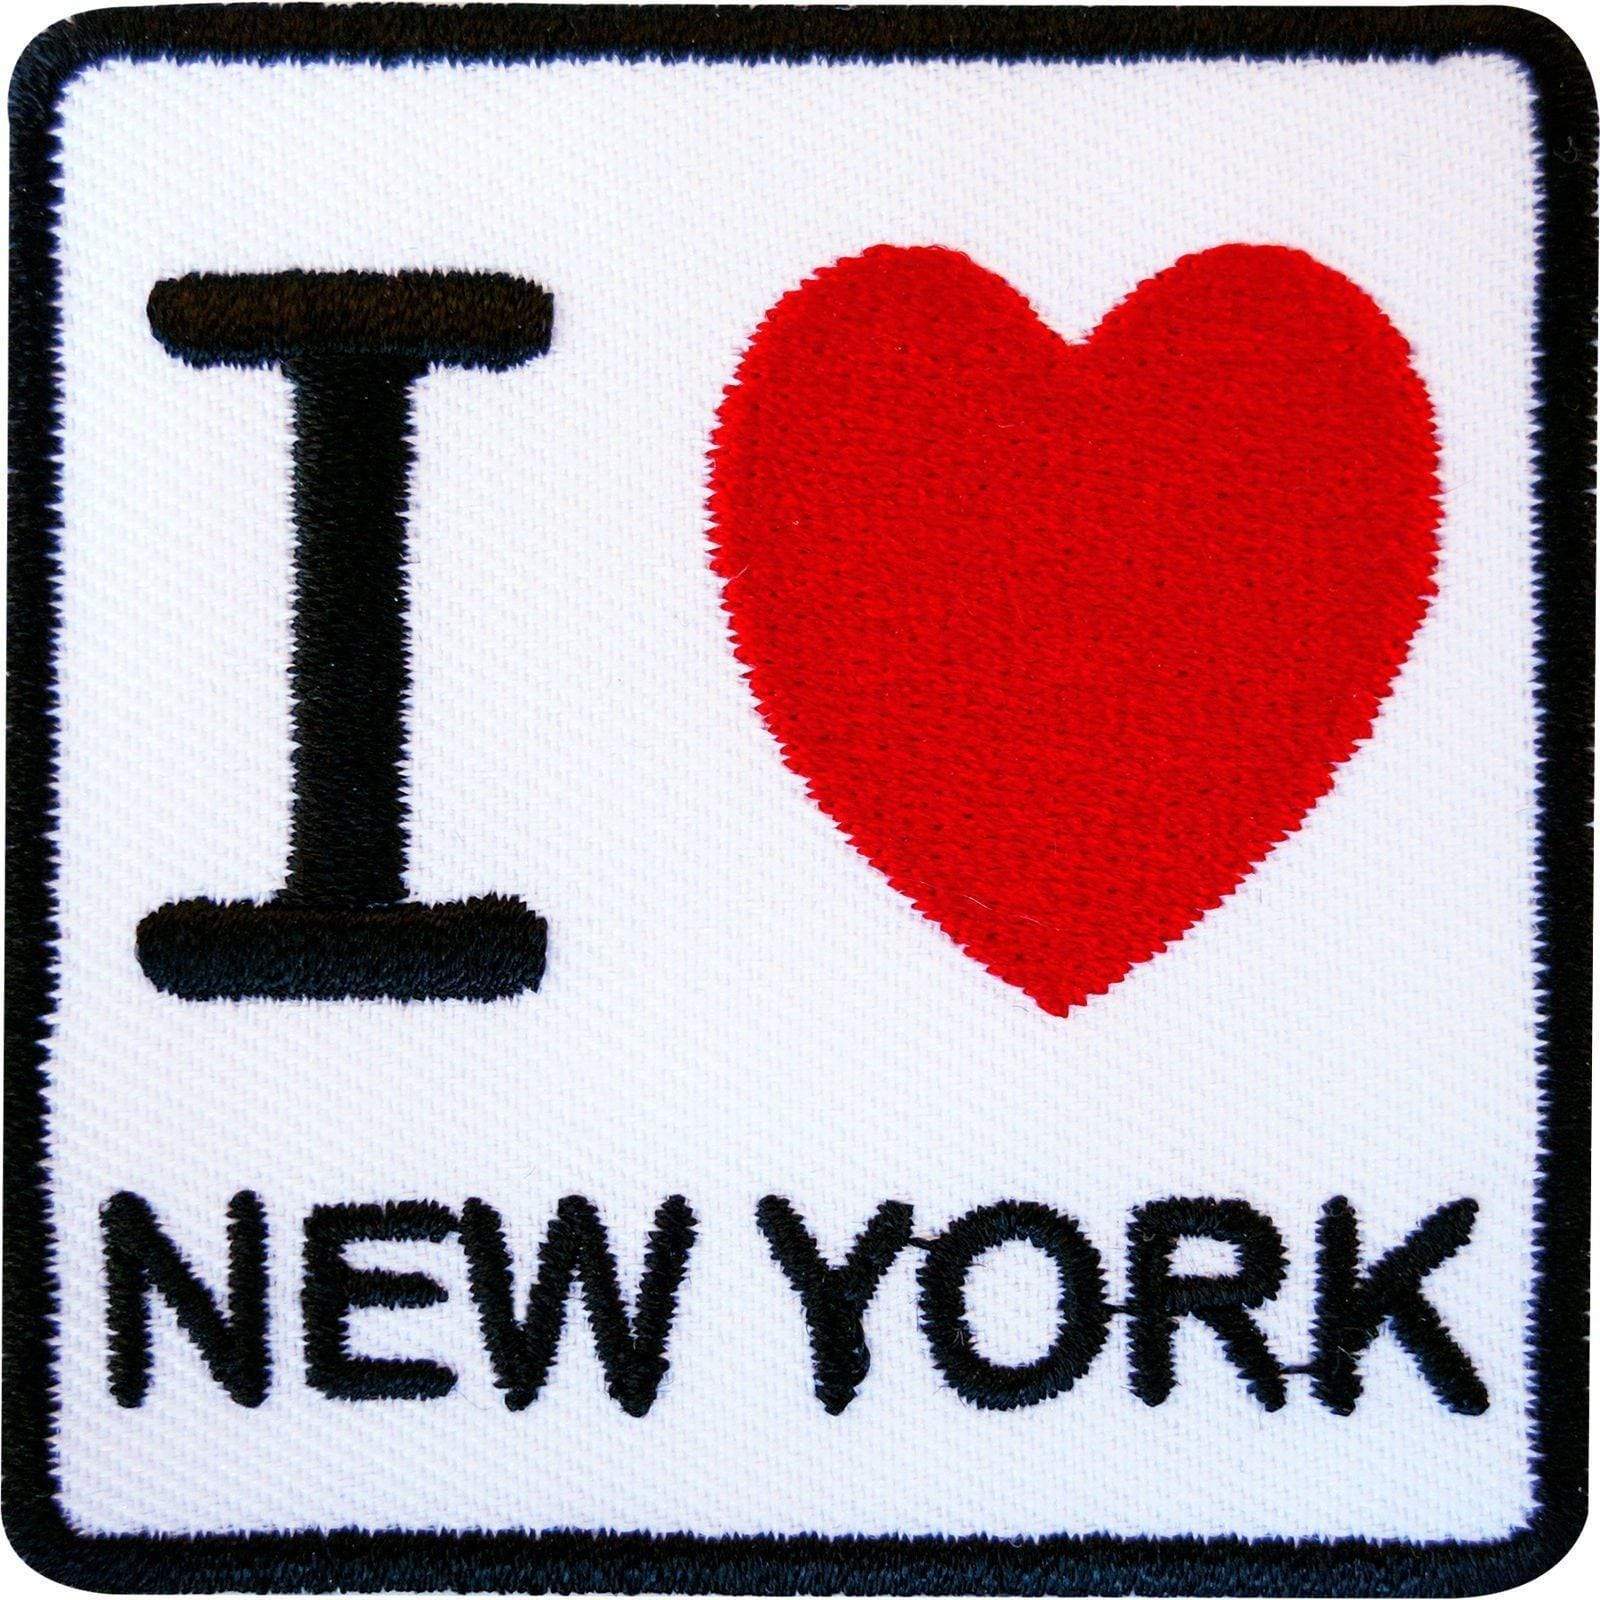 Embroidered Iron On I Love New York Patch Sew On Bag T Shirt Badge Heart USA US